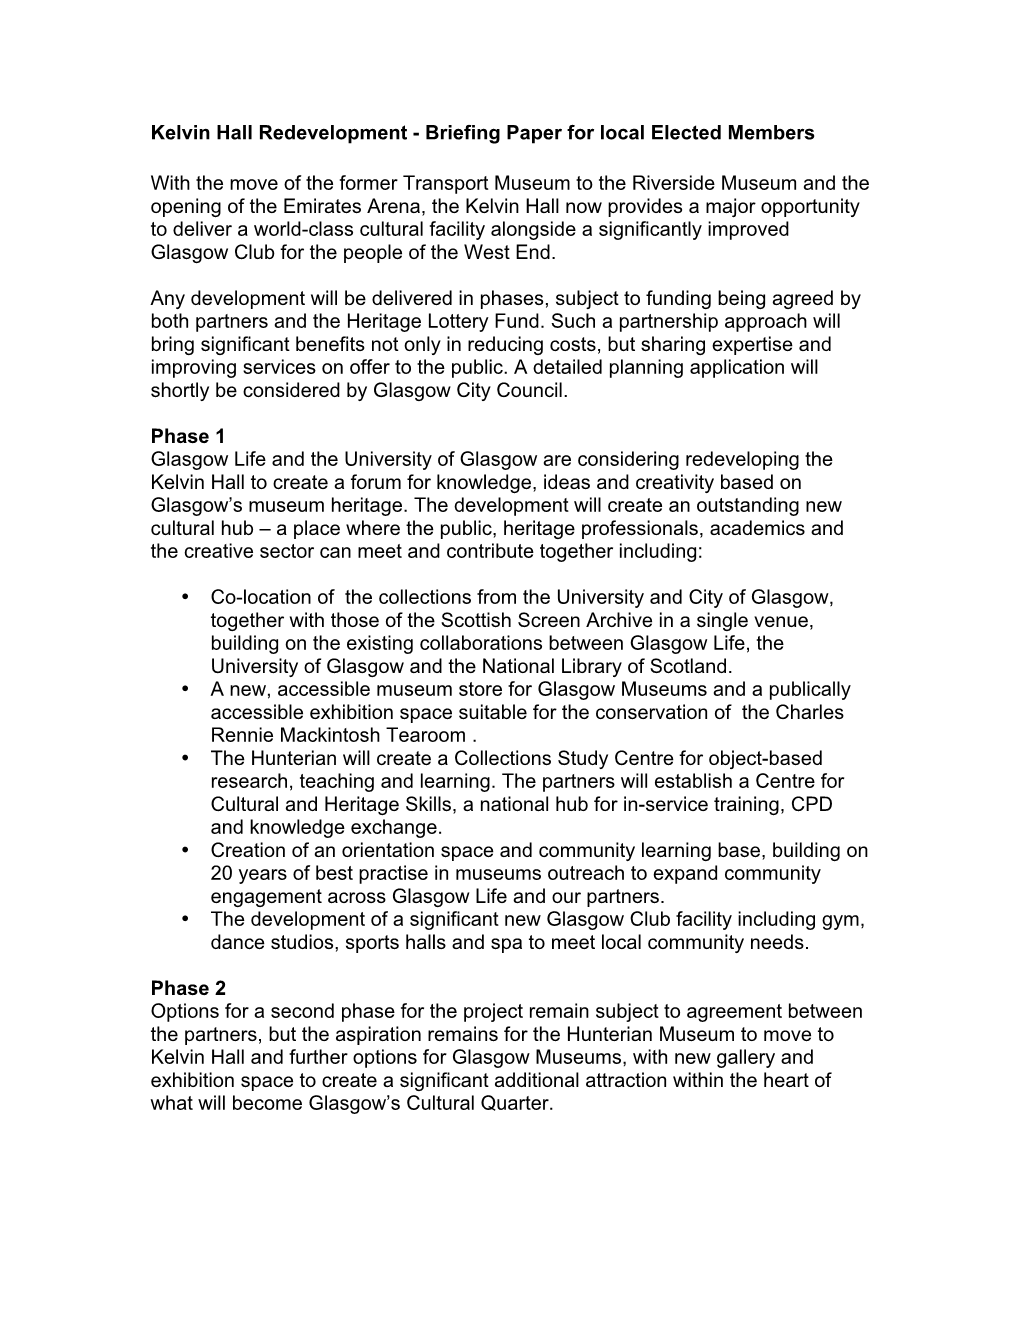 Kelvin Hall Redevelopment - Briefing Paper for Local Elected Members